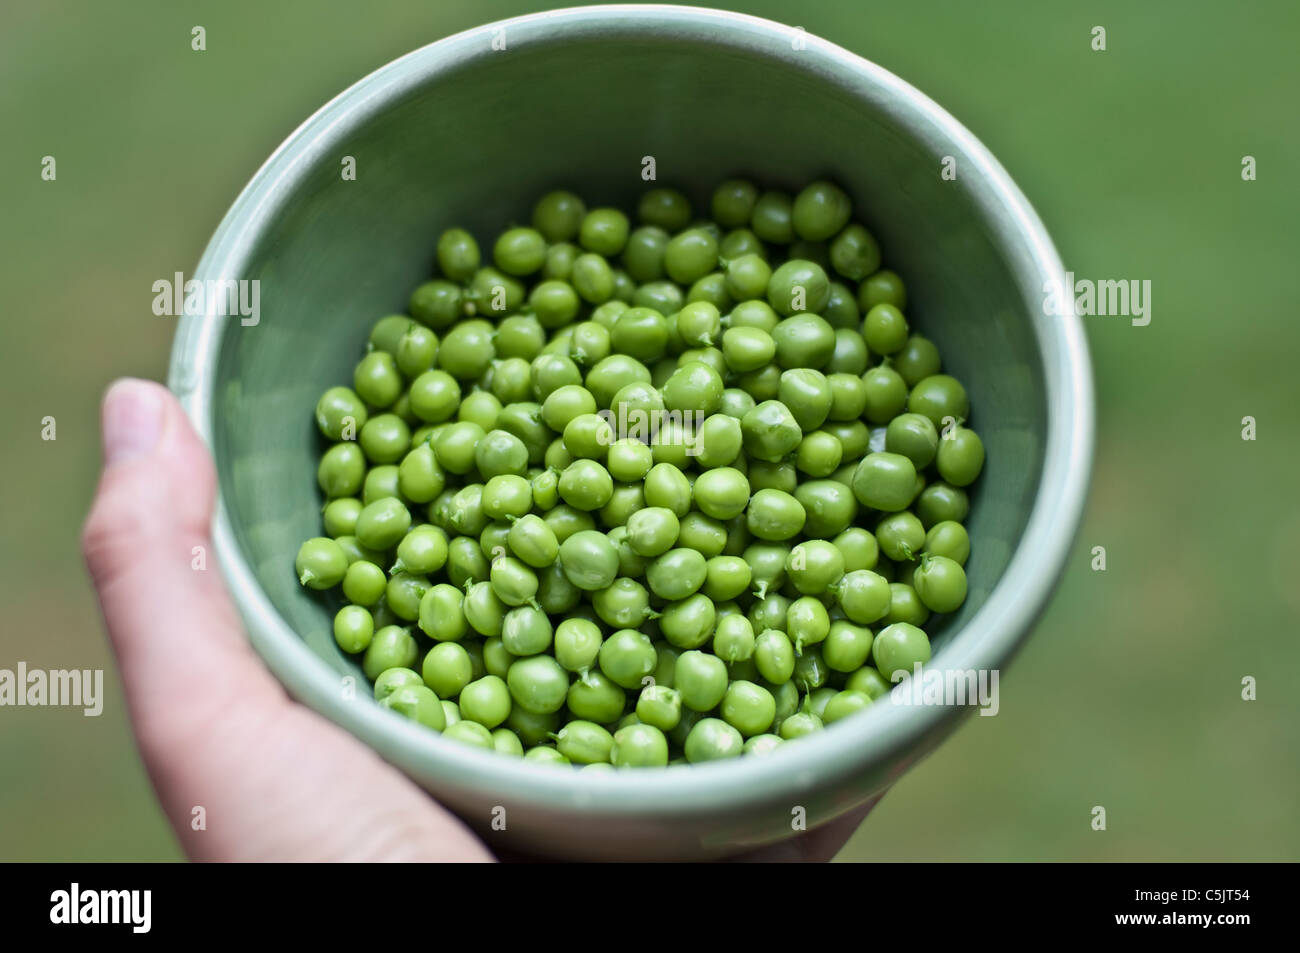 English peas, freshly picked and shelled in a green bowl. Stock Photo